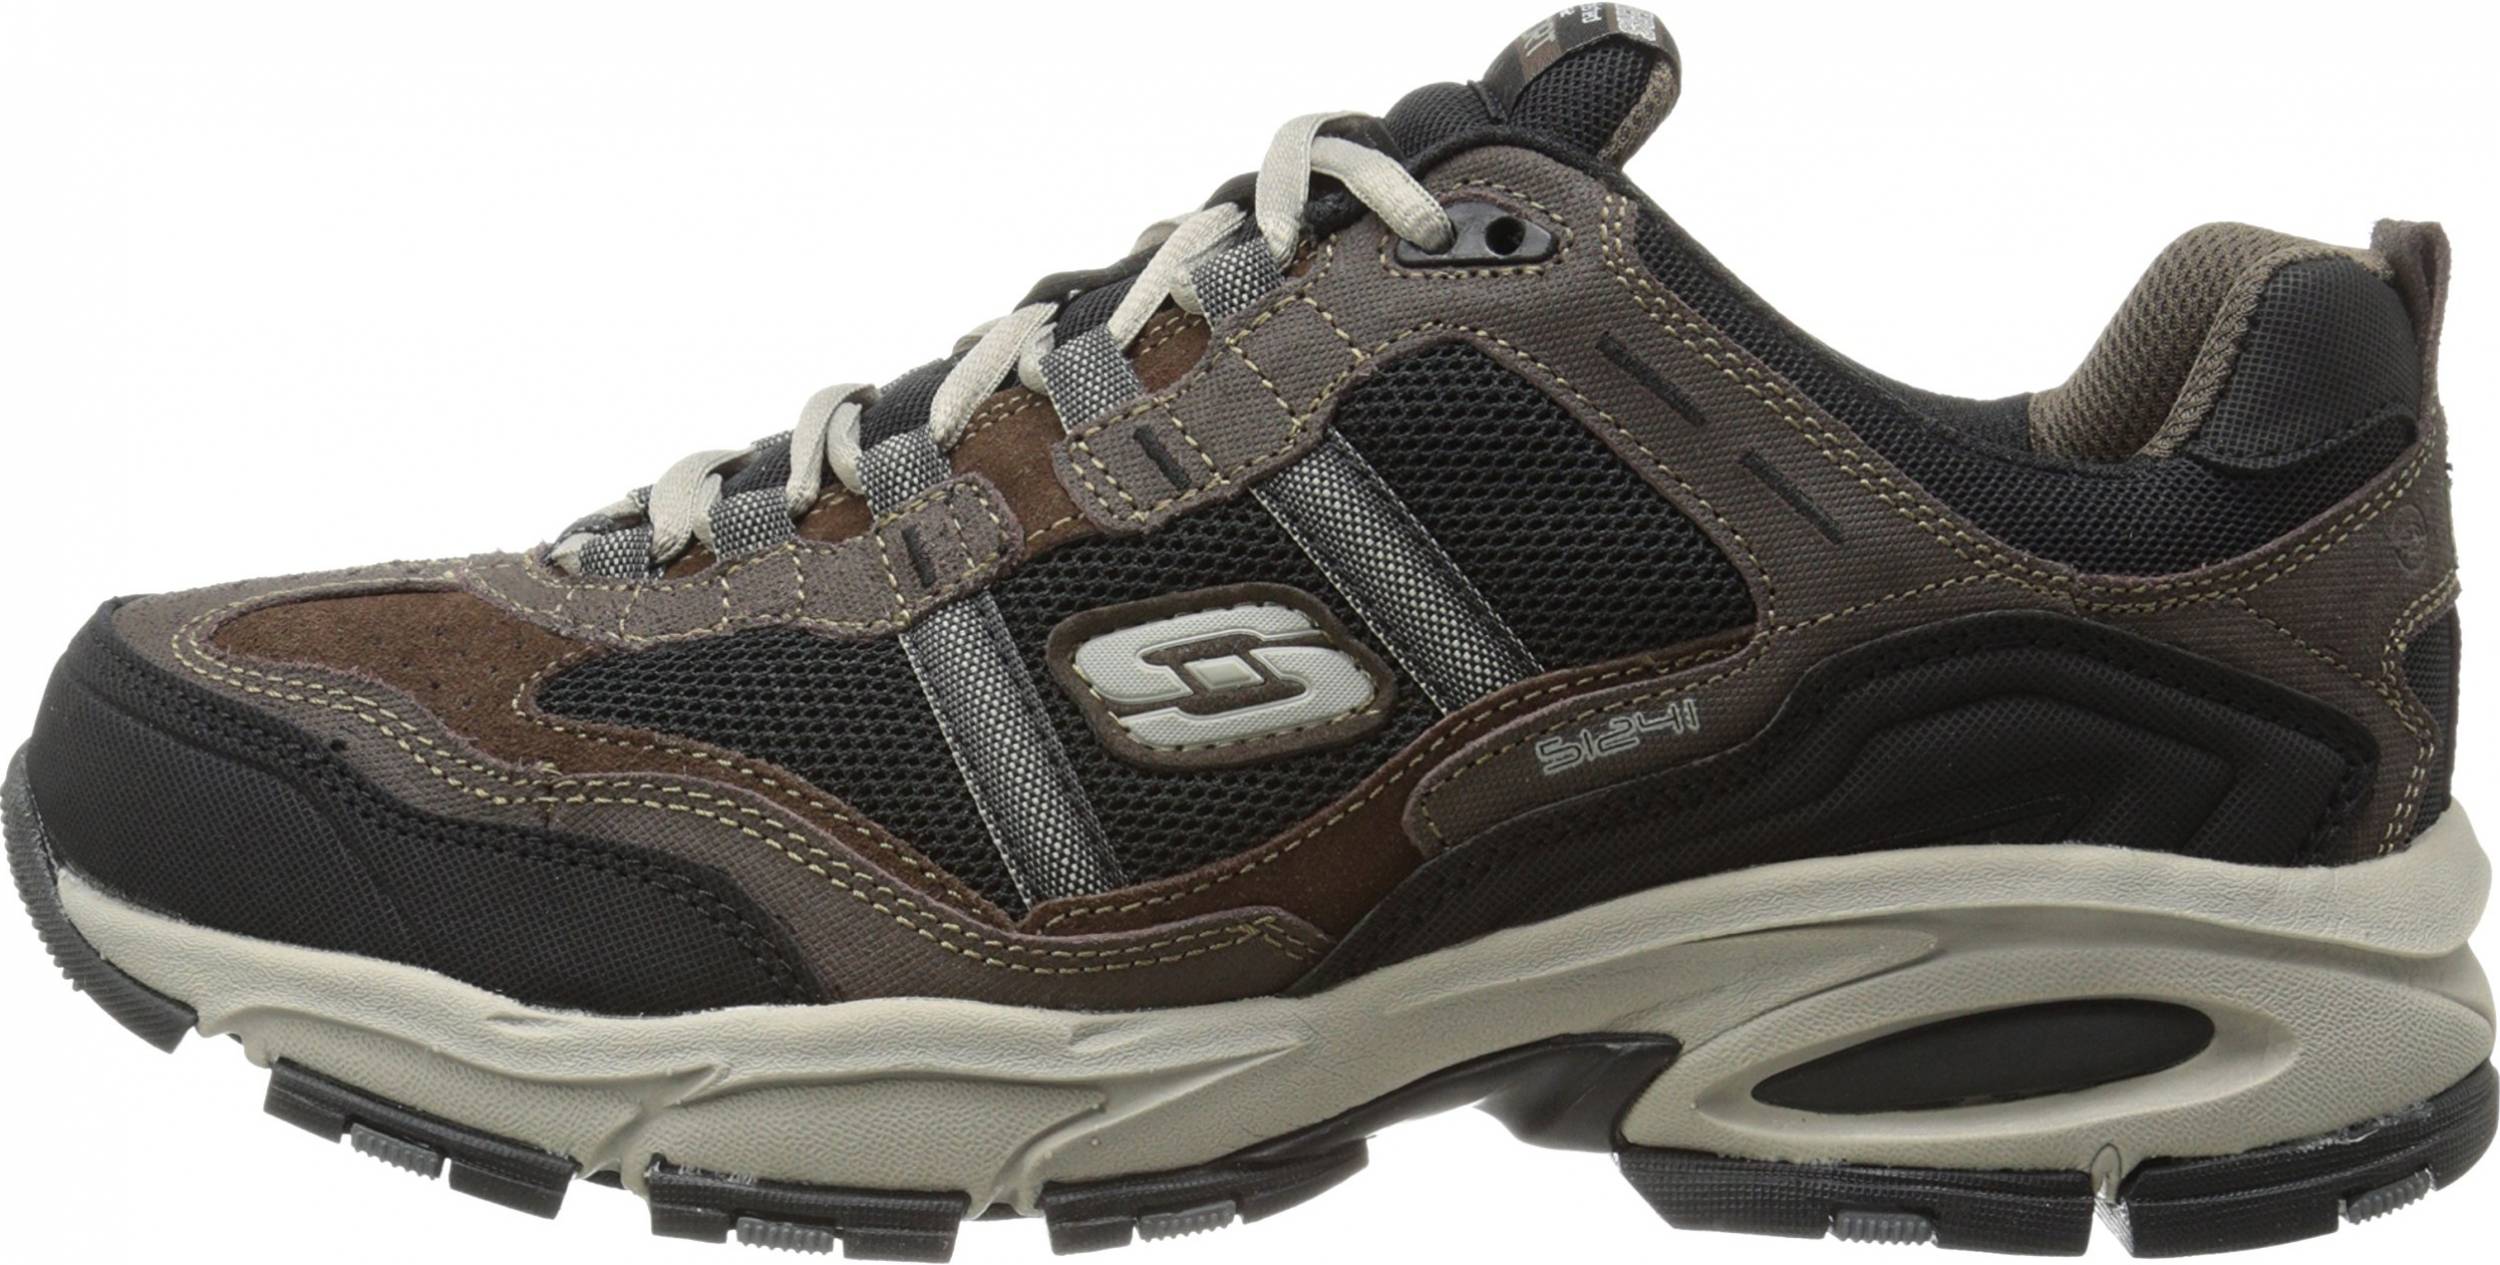 Save 28% on Skechers Workout Shoes (27 